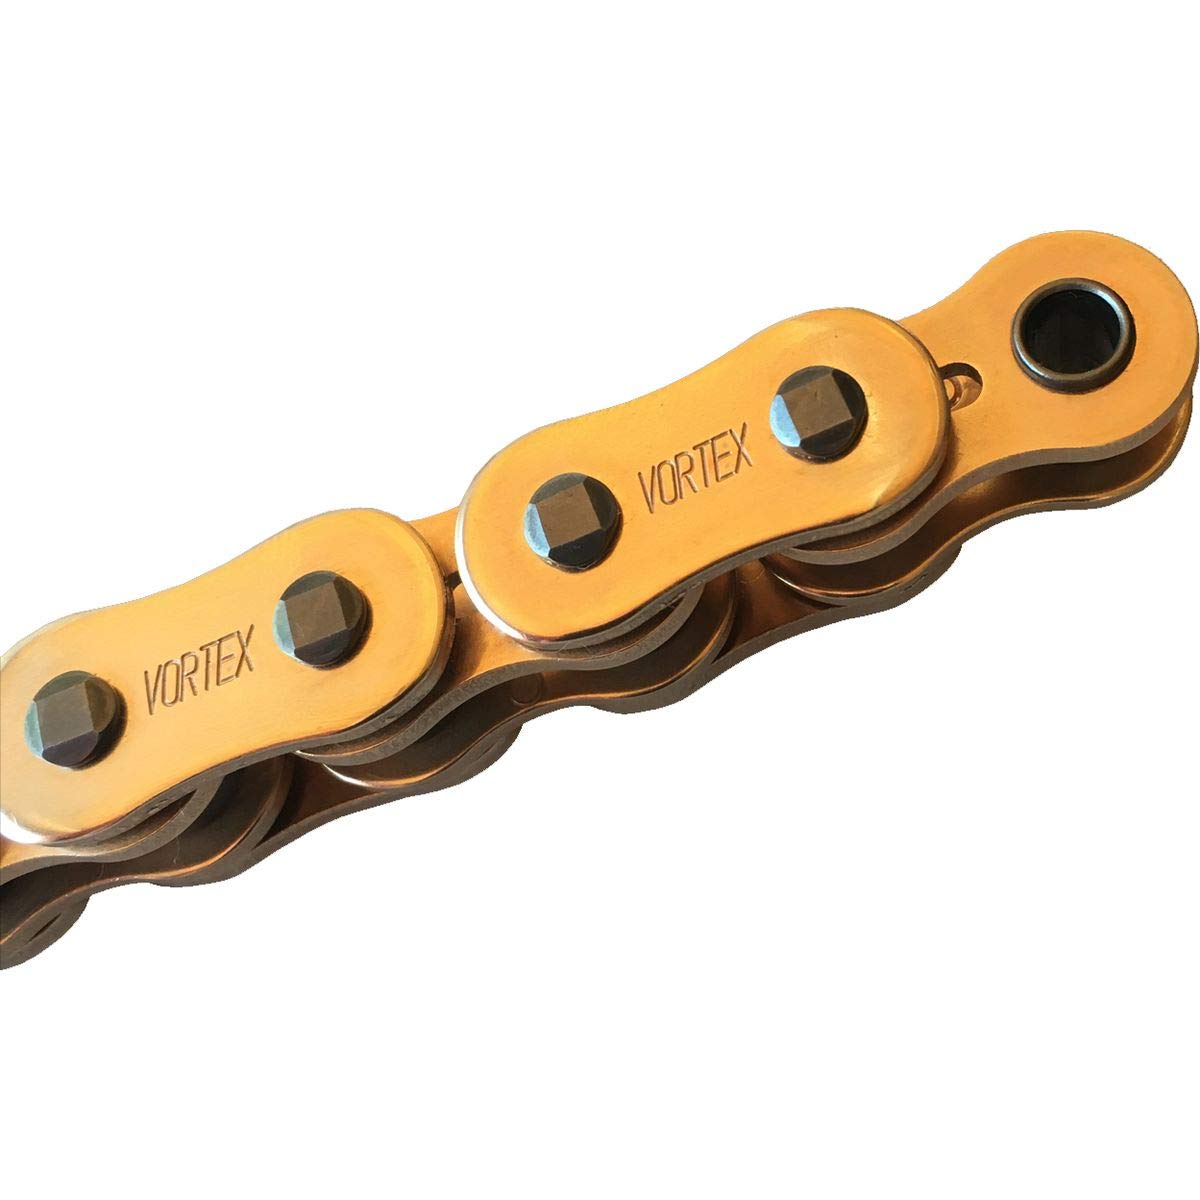 520 RX3 Racing Chain Gold 108 Links - Click Image to Close